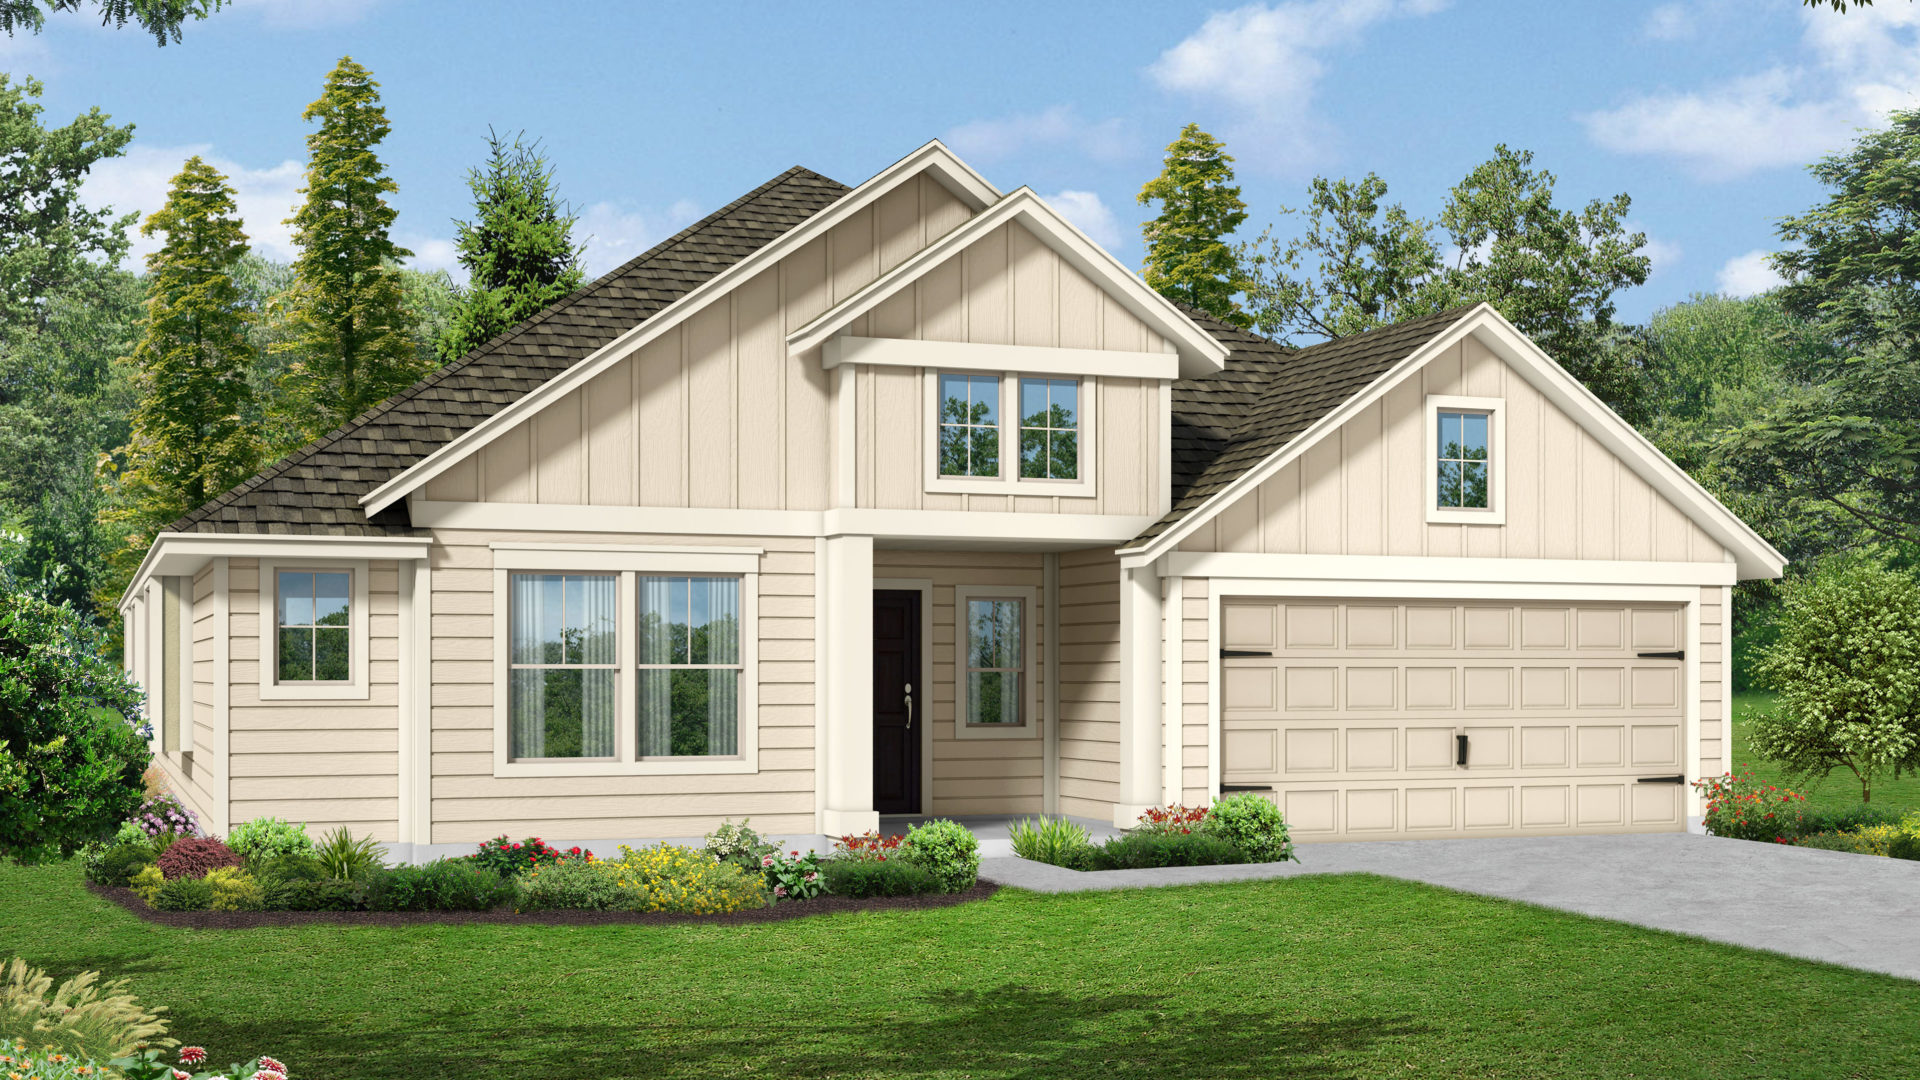 The Maybeck I Elevation E Orchard Ridge New Homes in Liberty Hill